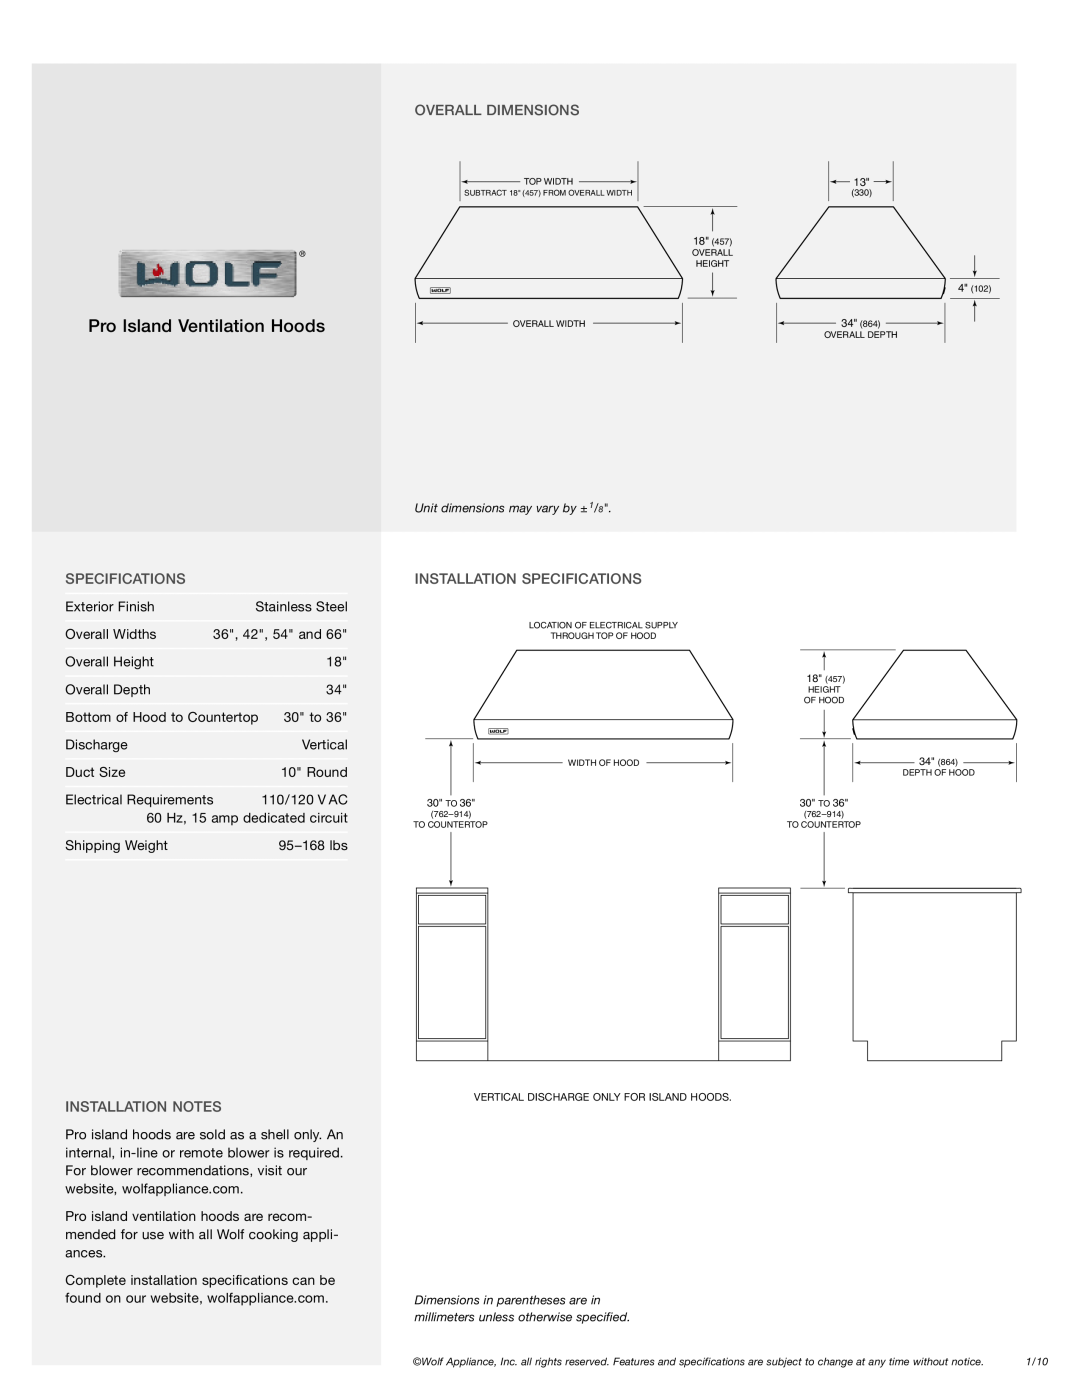 Wolf PI663418 manual Overall Dimensions, Installation Specifications, Installation Notes, Pro Island Ventilation Hoods 